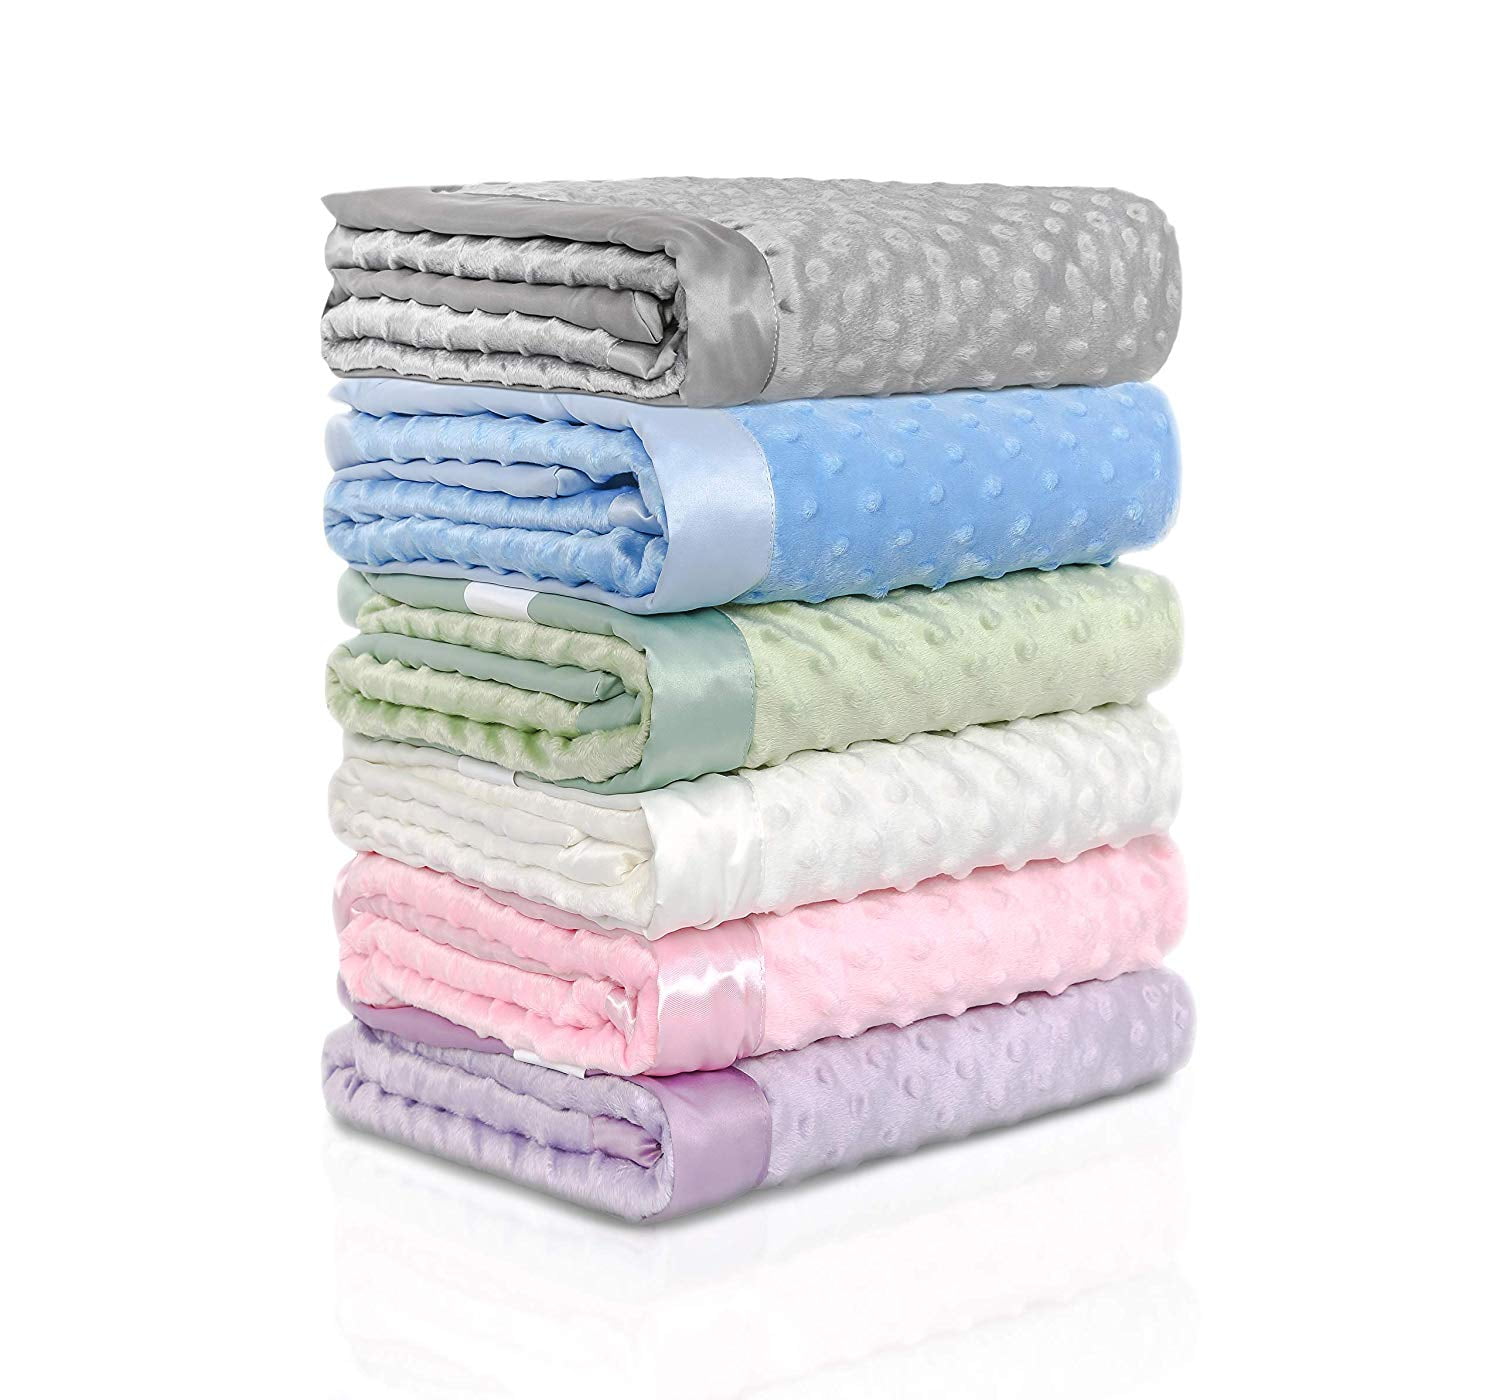 KOYOU BABY - Soft Minky Plush Reversible Baby Blanket with Dotted